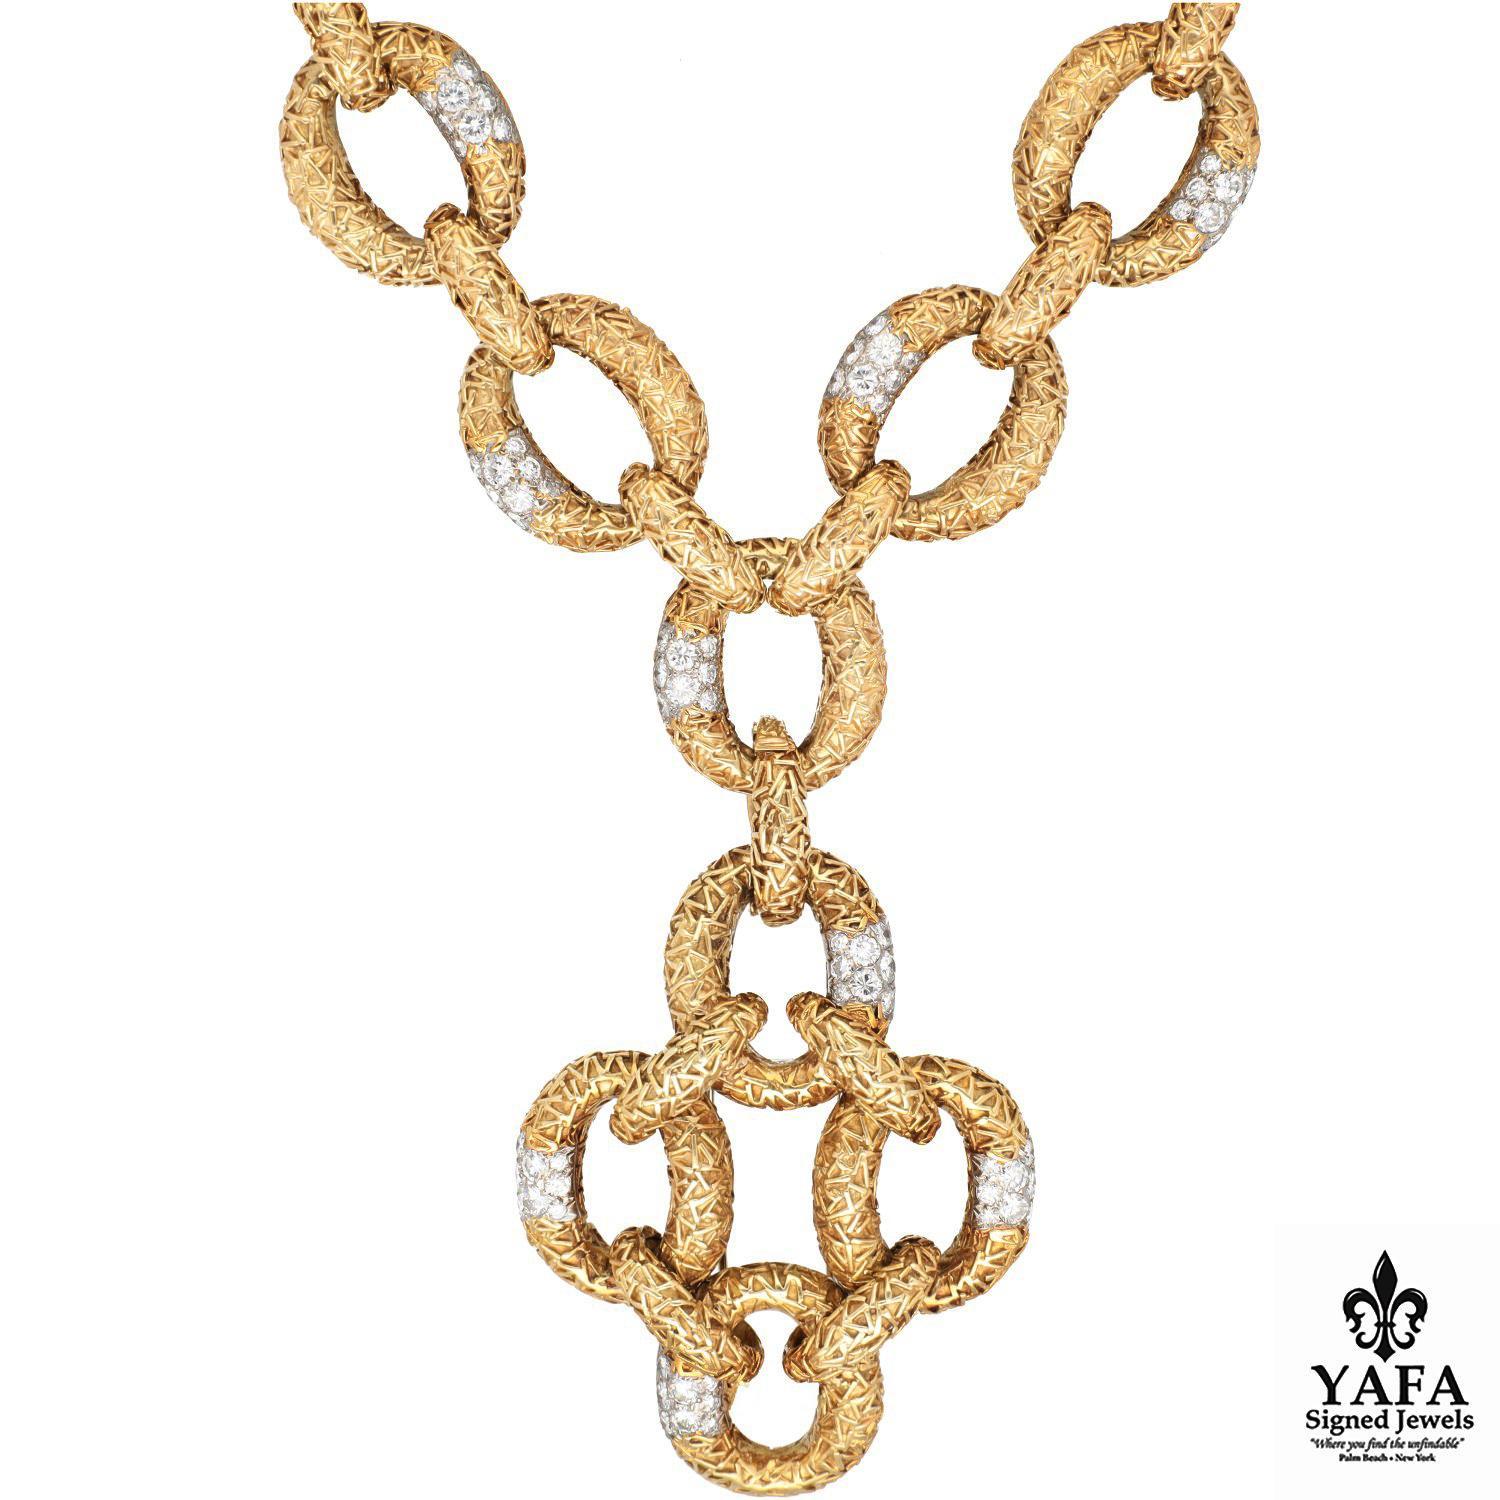 An Exquisite Link Necklace and Pendent Comprised of Textured 18K Gold, Illuminated By Dazzling Diamonds With Four Removable Segments That Can Be Worn As A Set And Independantly For A Plentifully Variety Of Wear. 
Approximate Length - 31.50